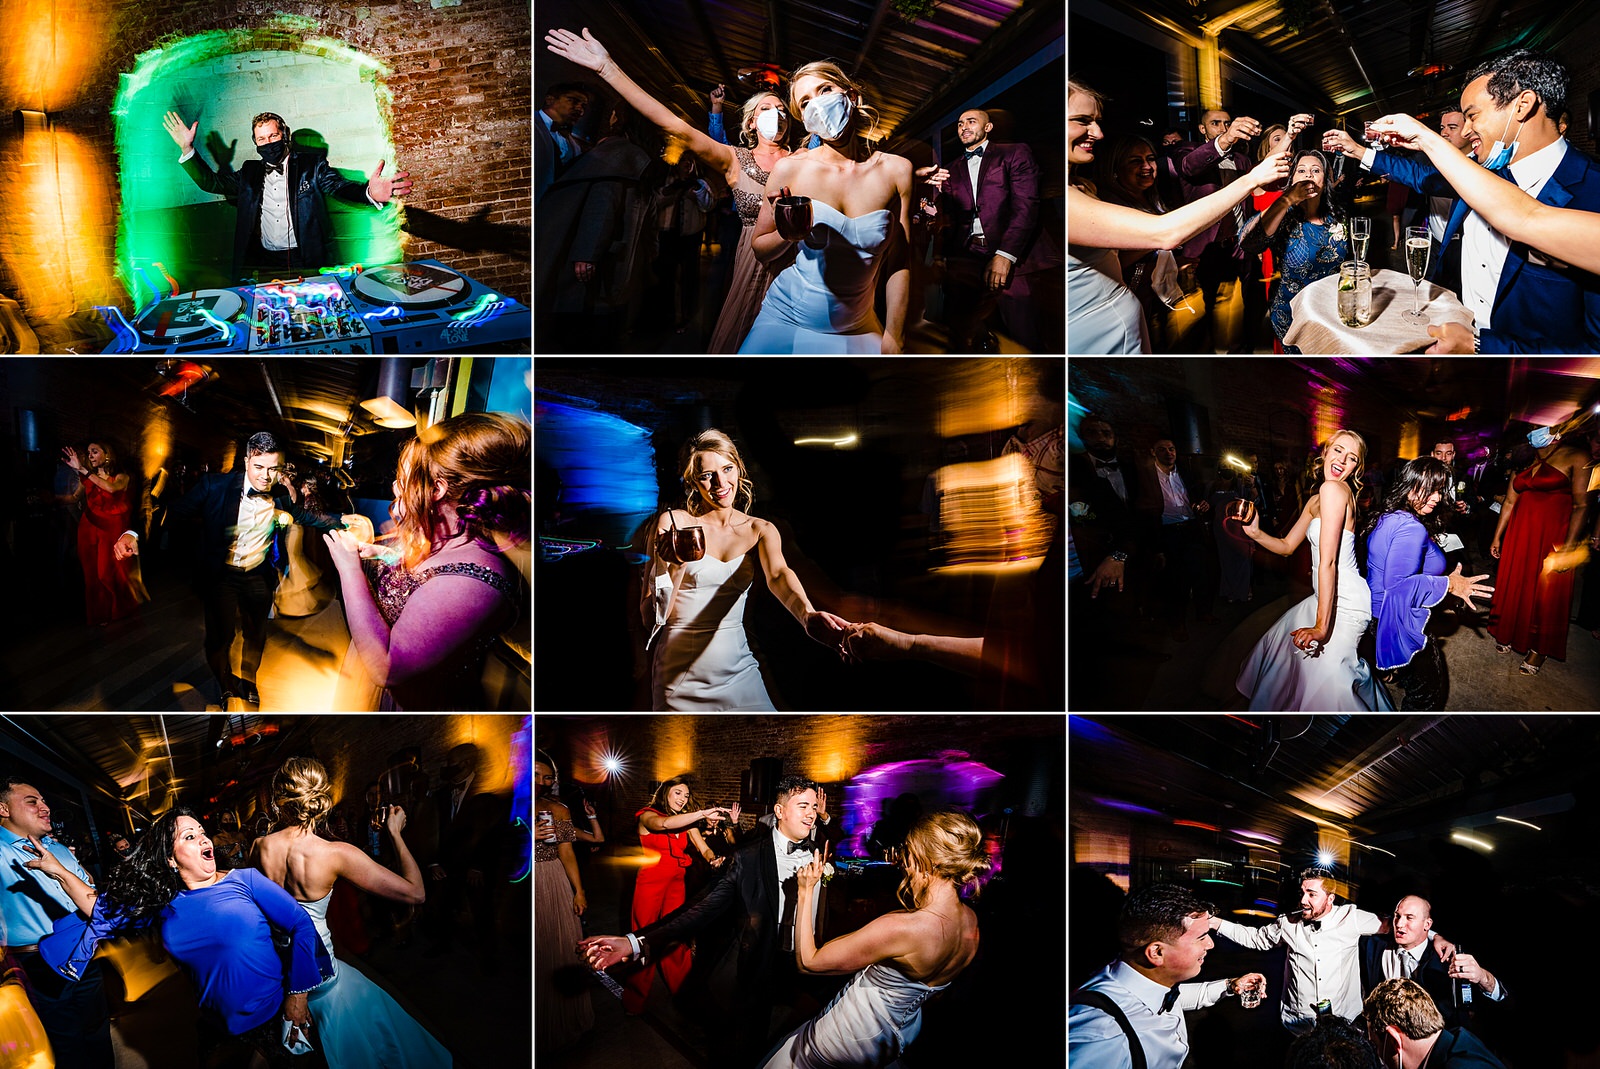 A great DJ, colorful lights, and a fun crowd make for the best wedding receptions